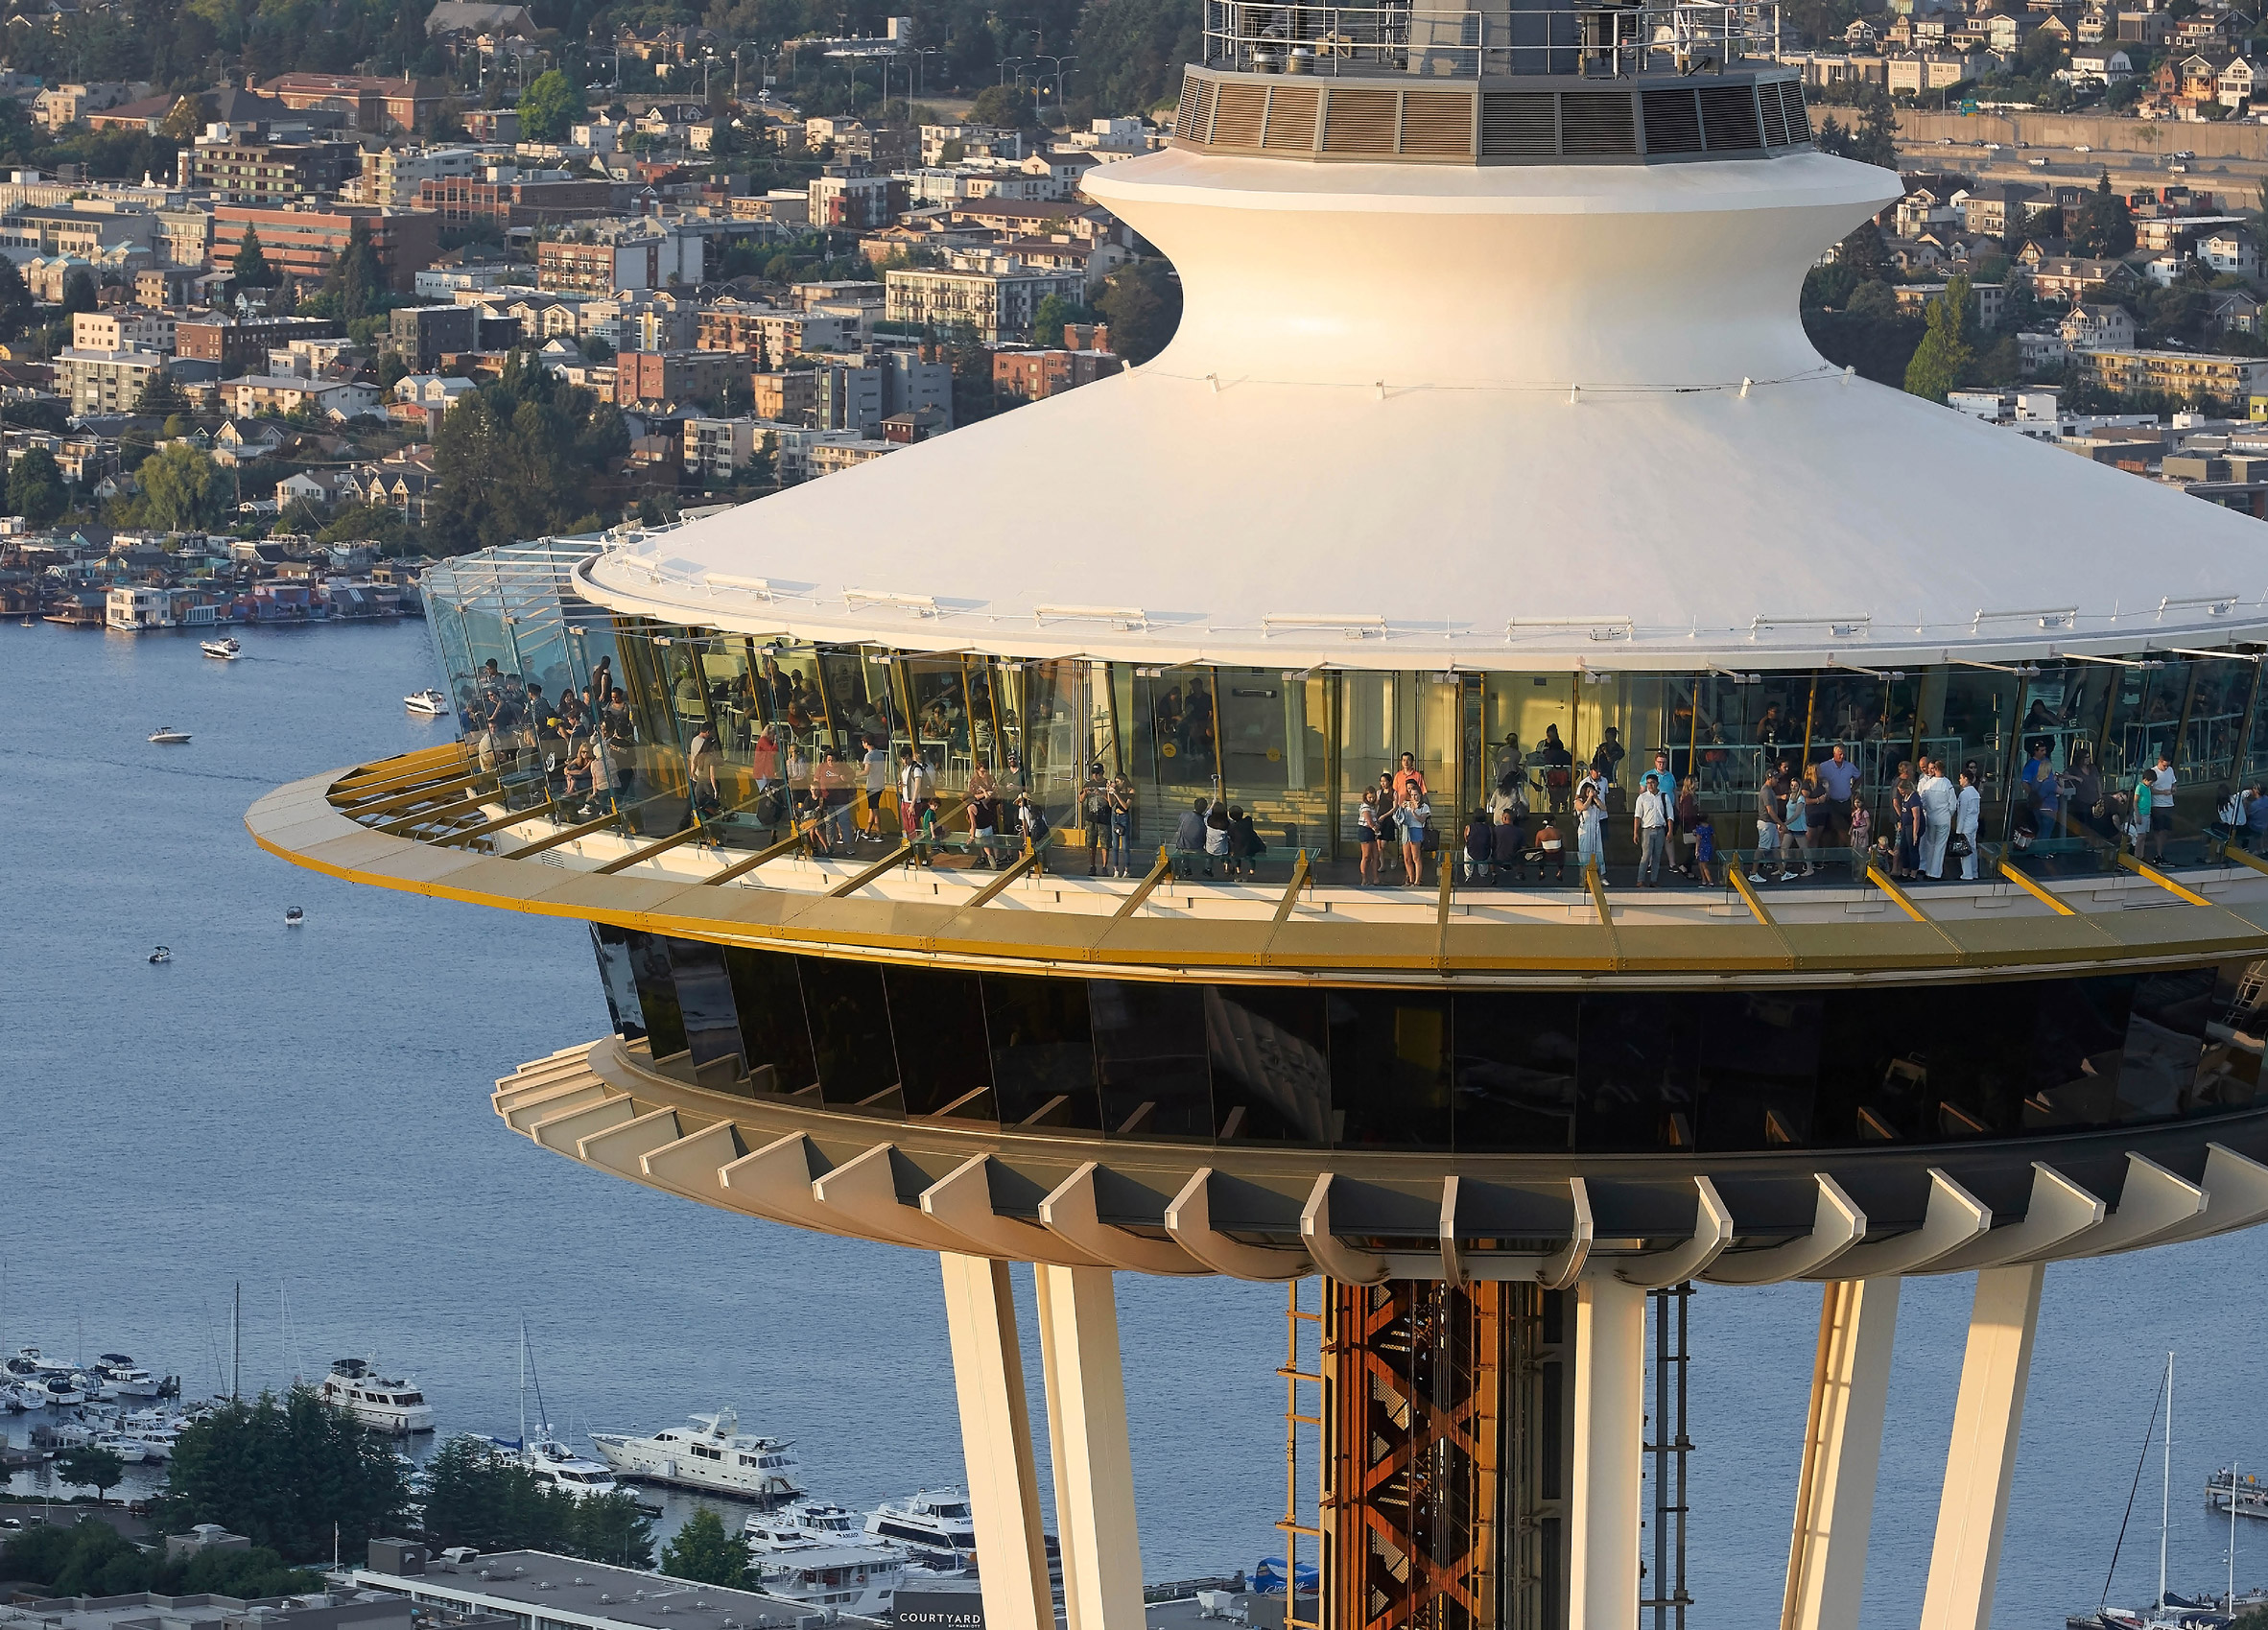 Space needle renovation exterior winner of AIA awards